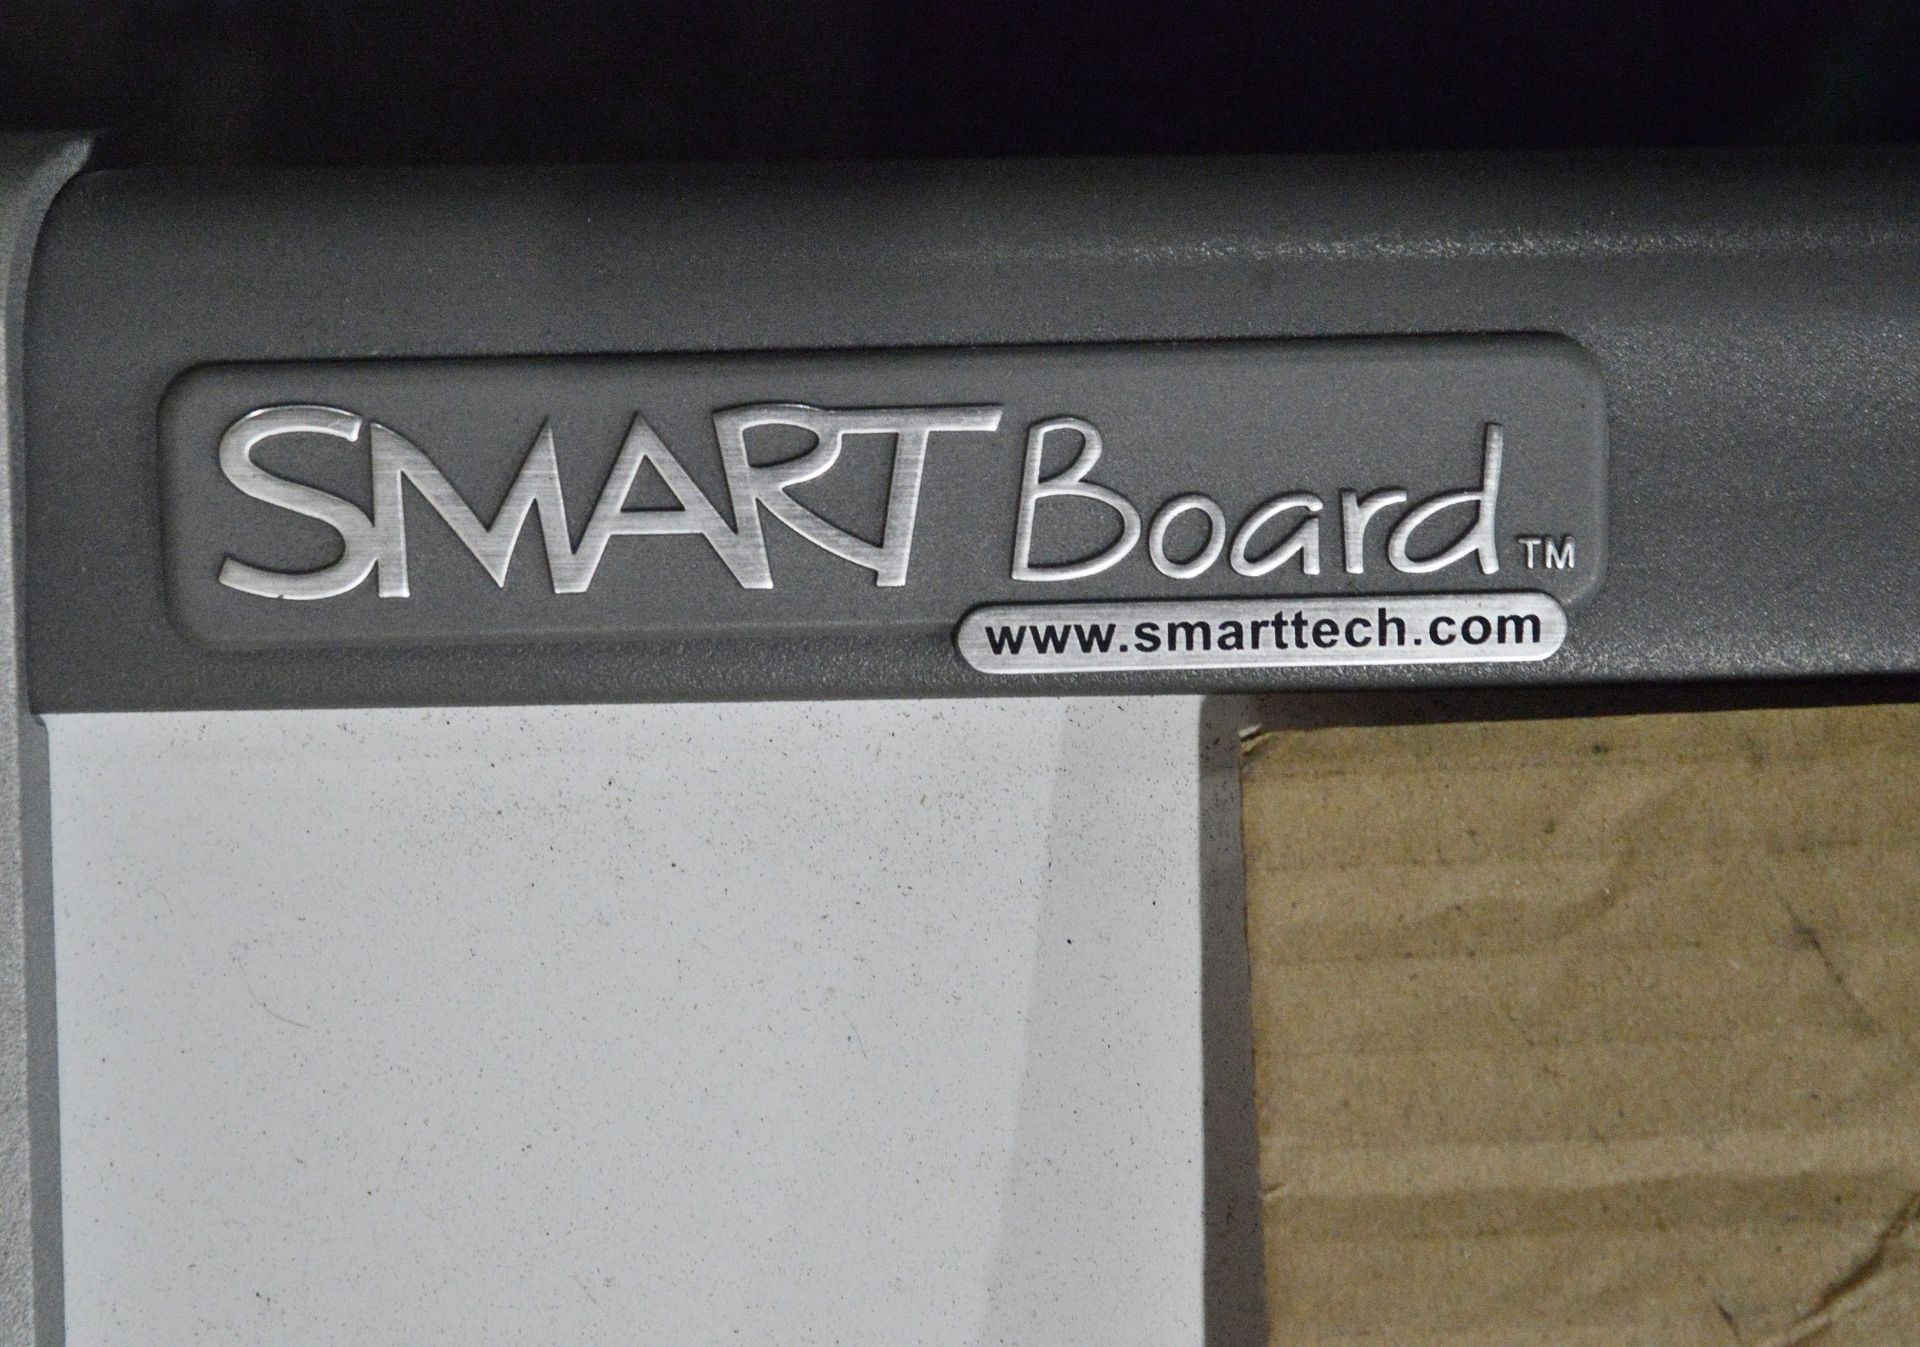 Smart board white board assembly - no accessories - Image 3 of 3